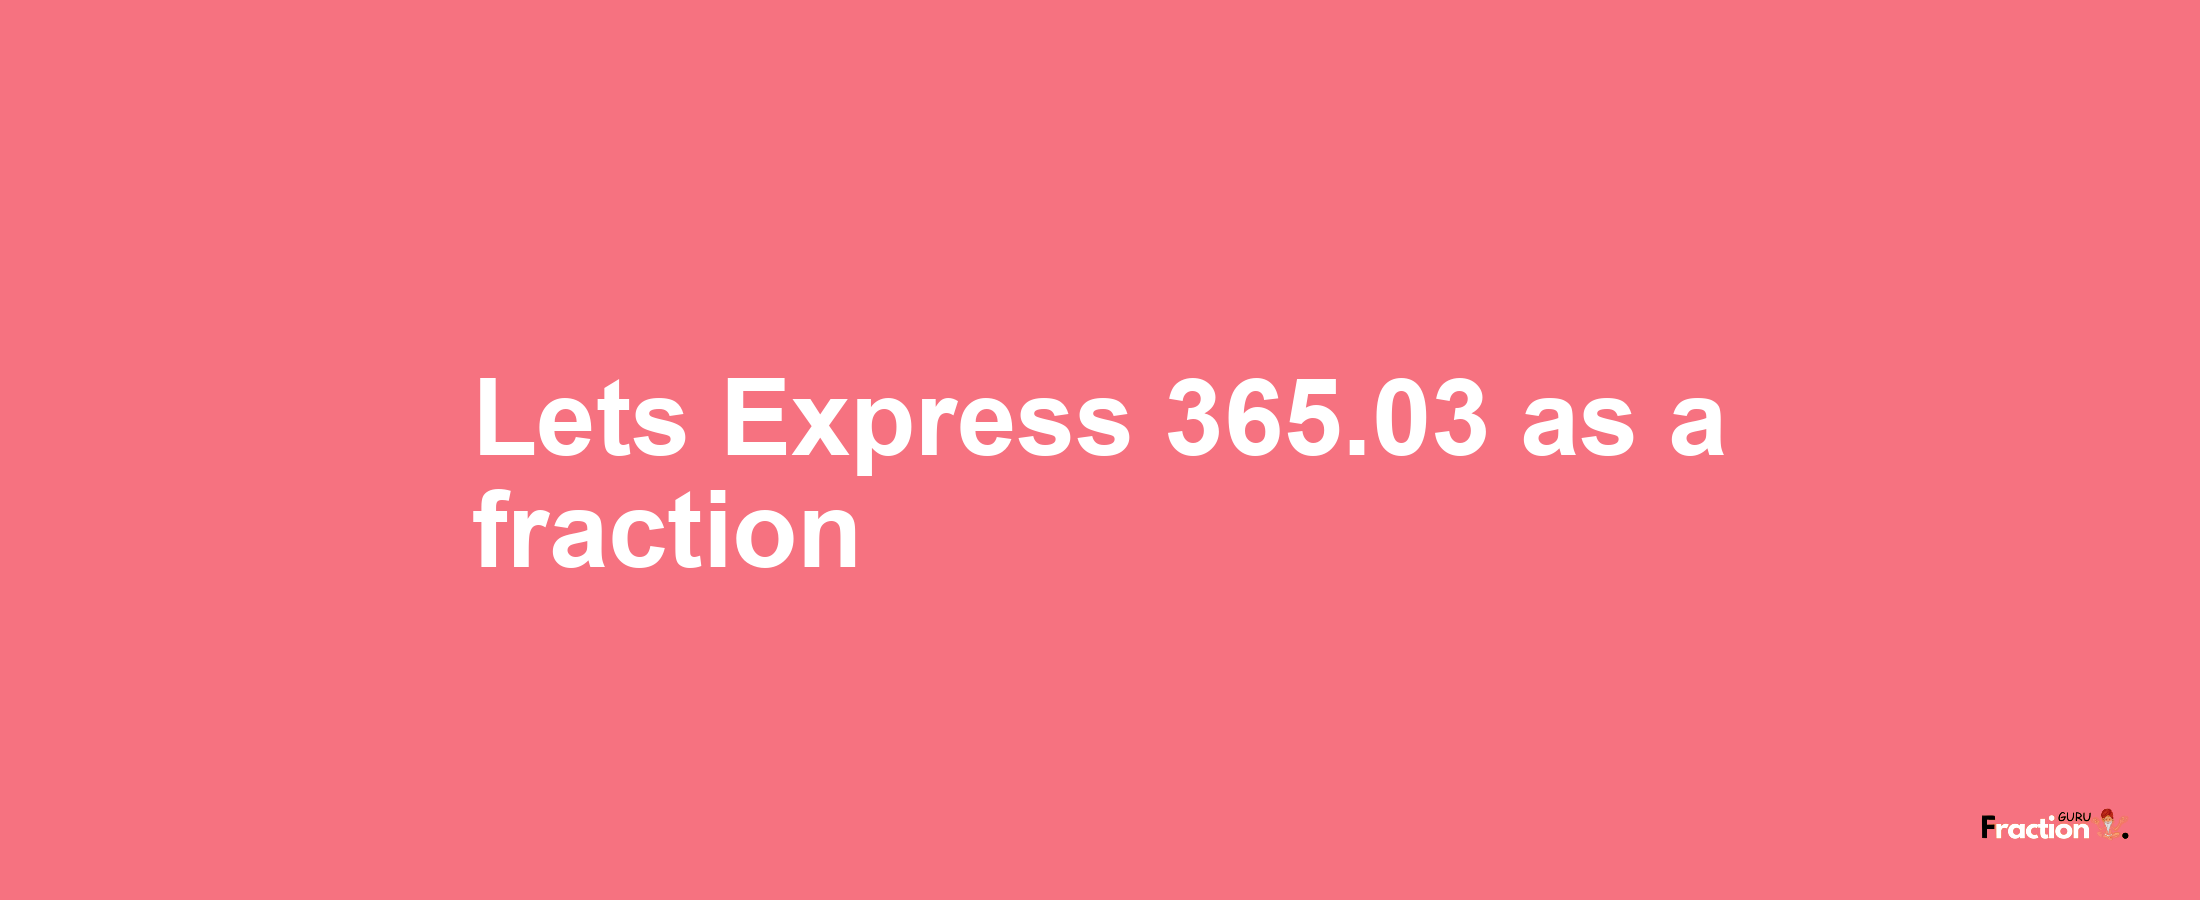 Lets Express 365.03 as afraction